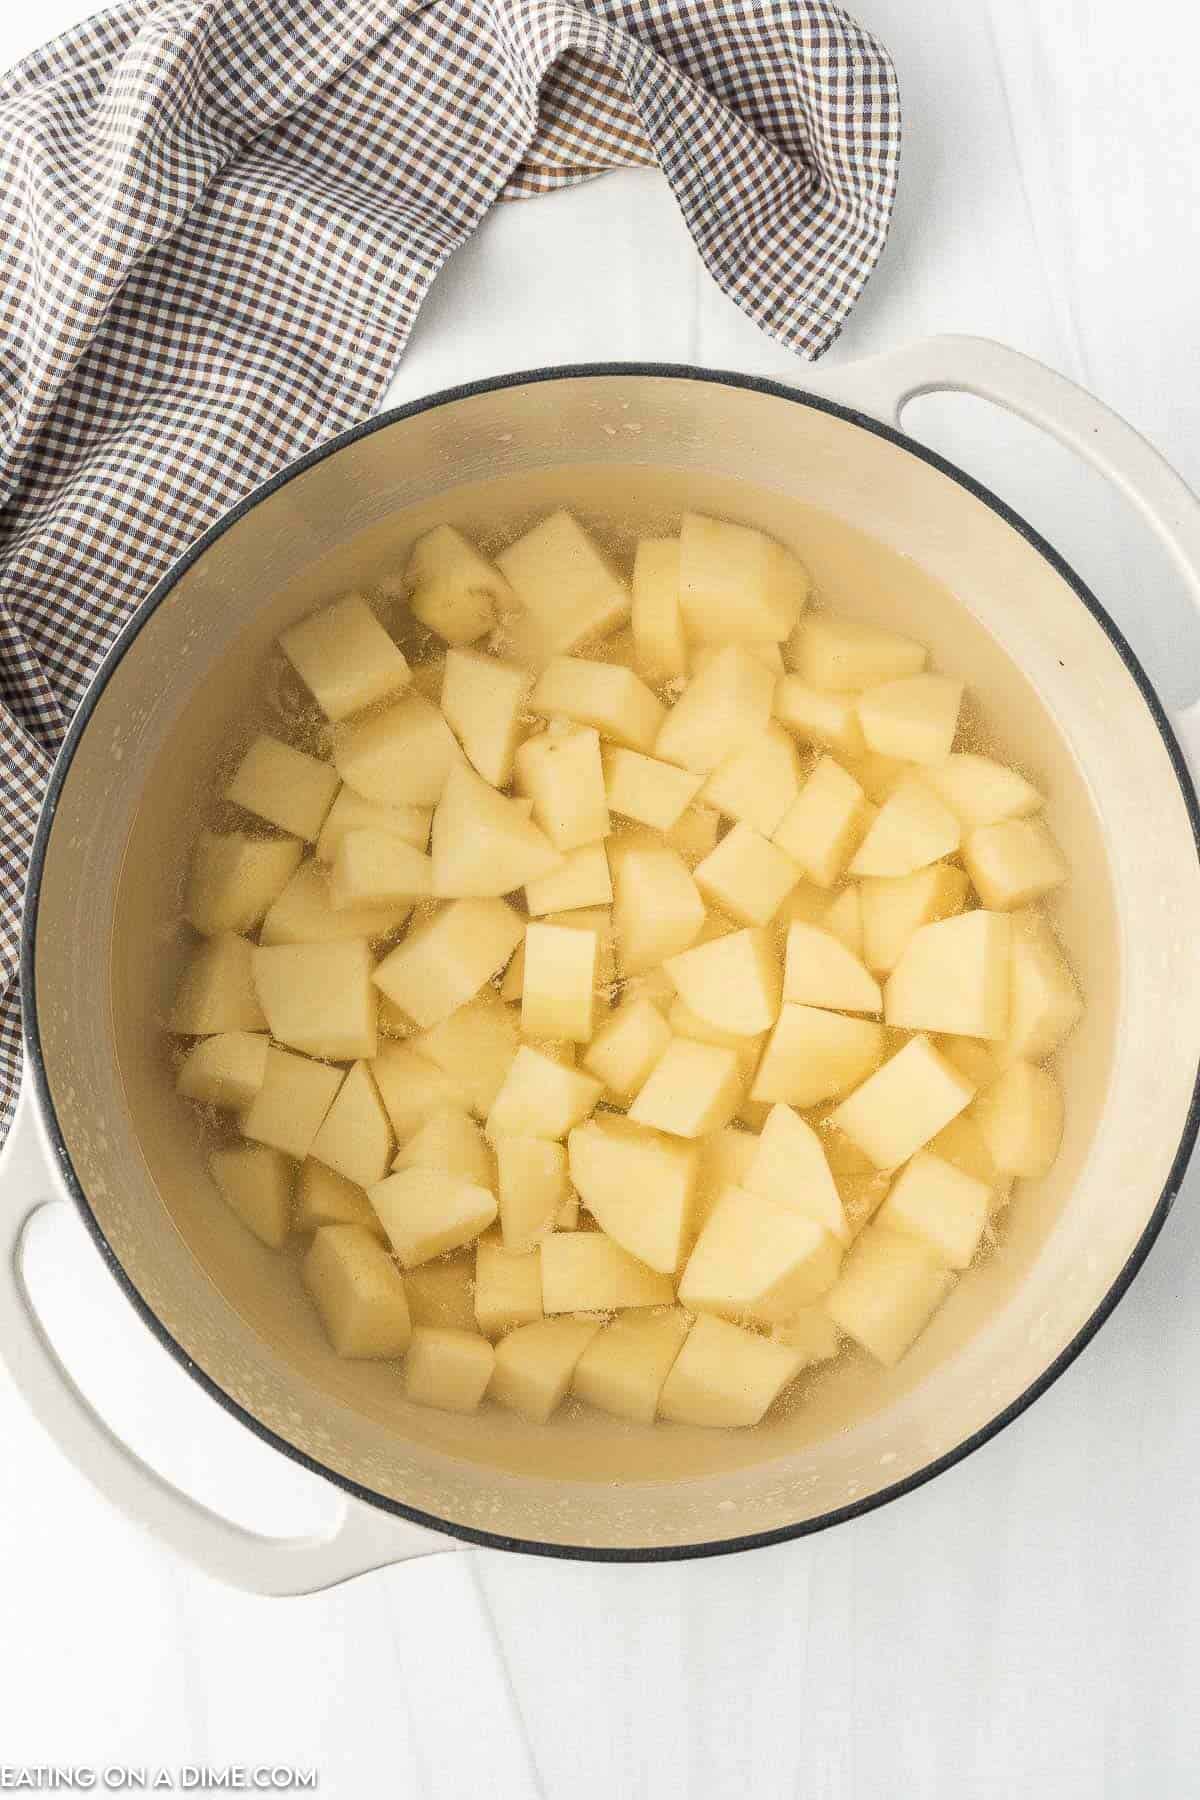 Placing diced potatoes in a large pot of water